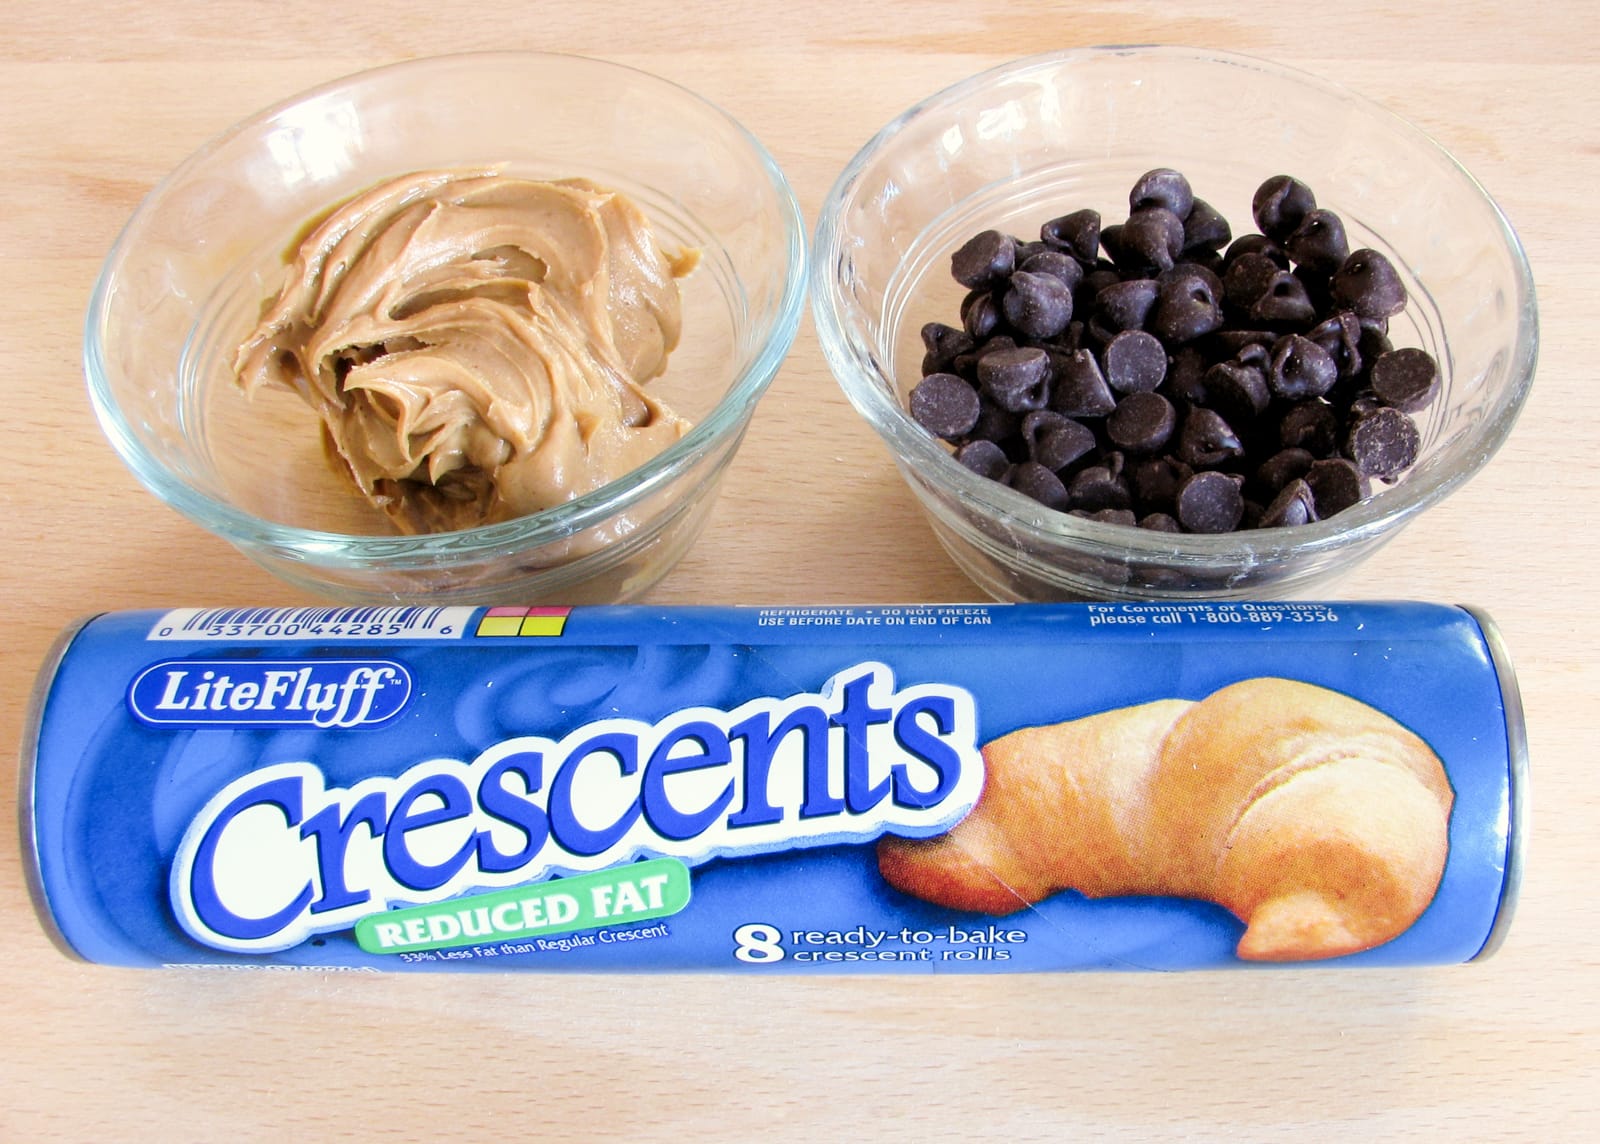 Chocolate and Peanut Butter Filled Crescent Rolls